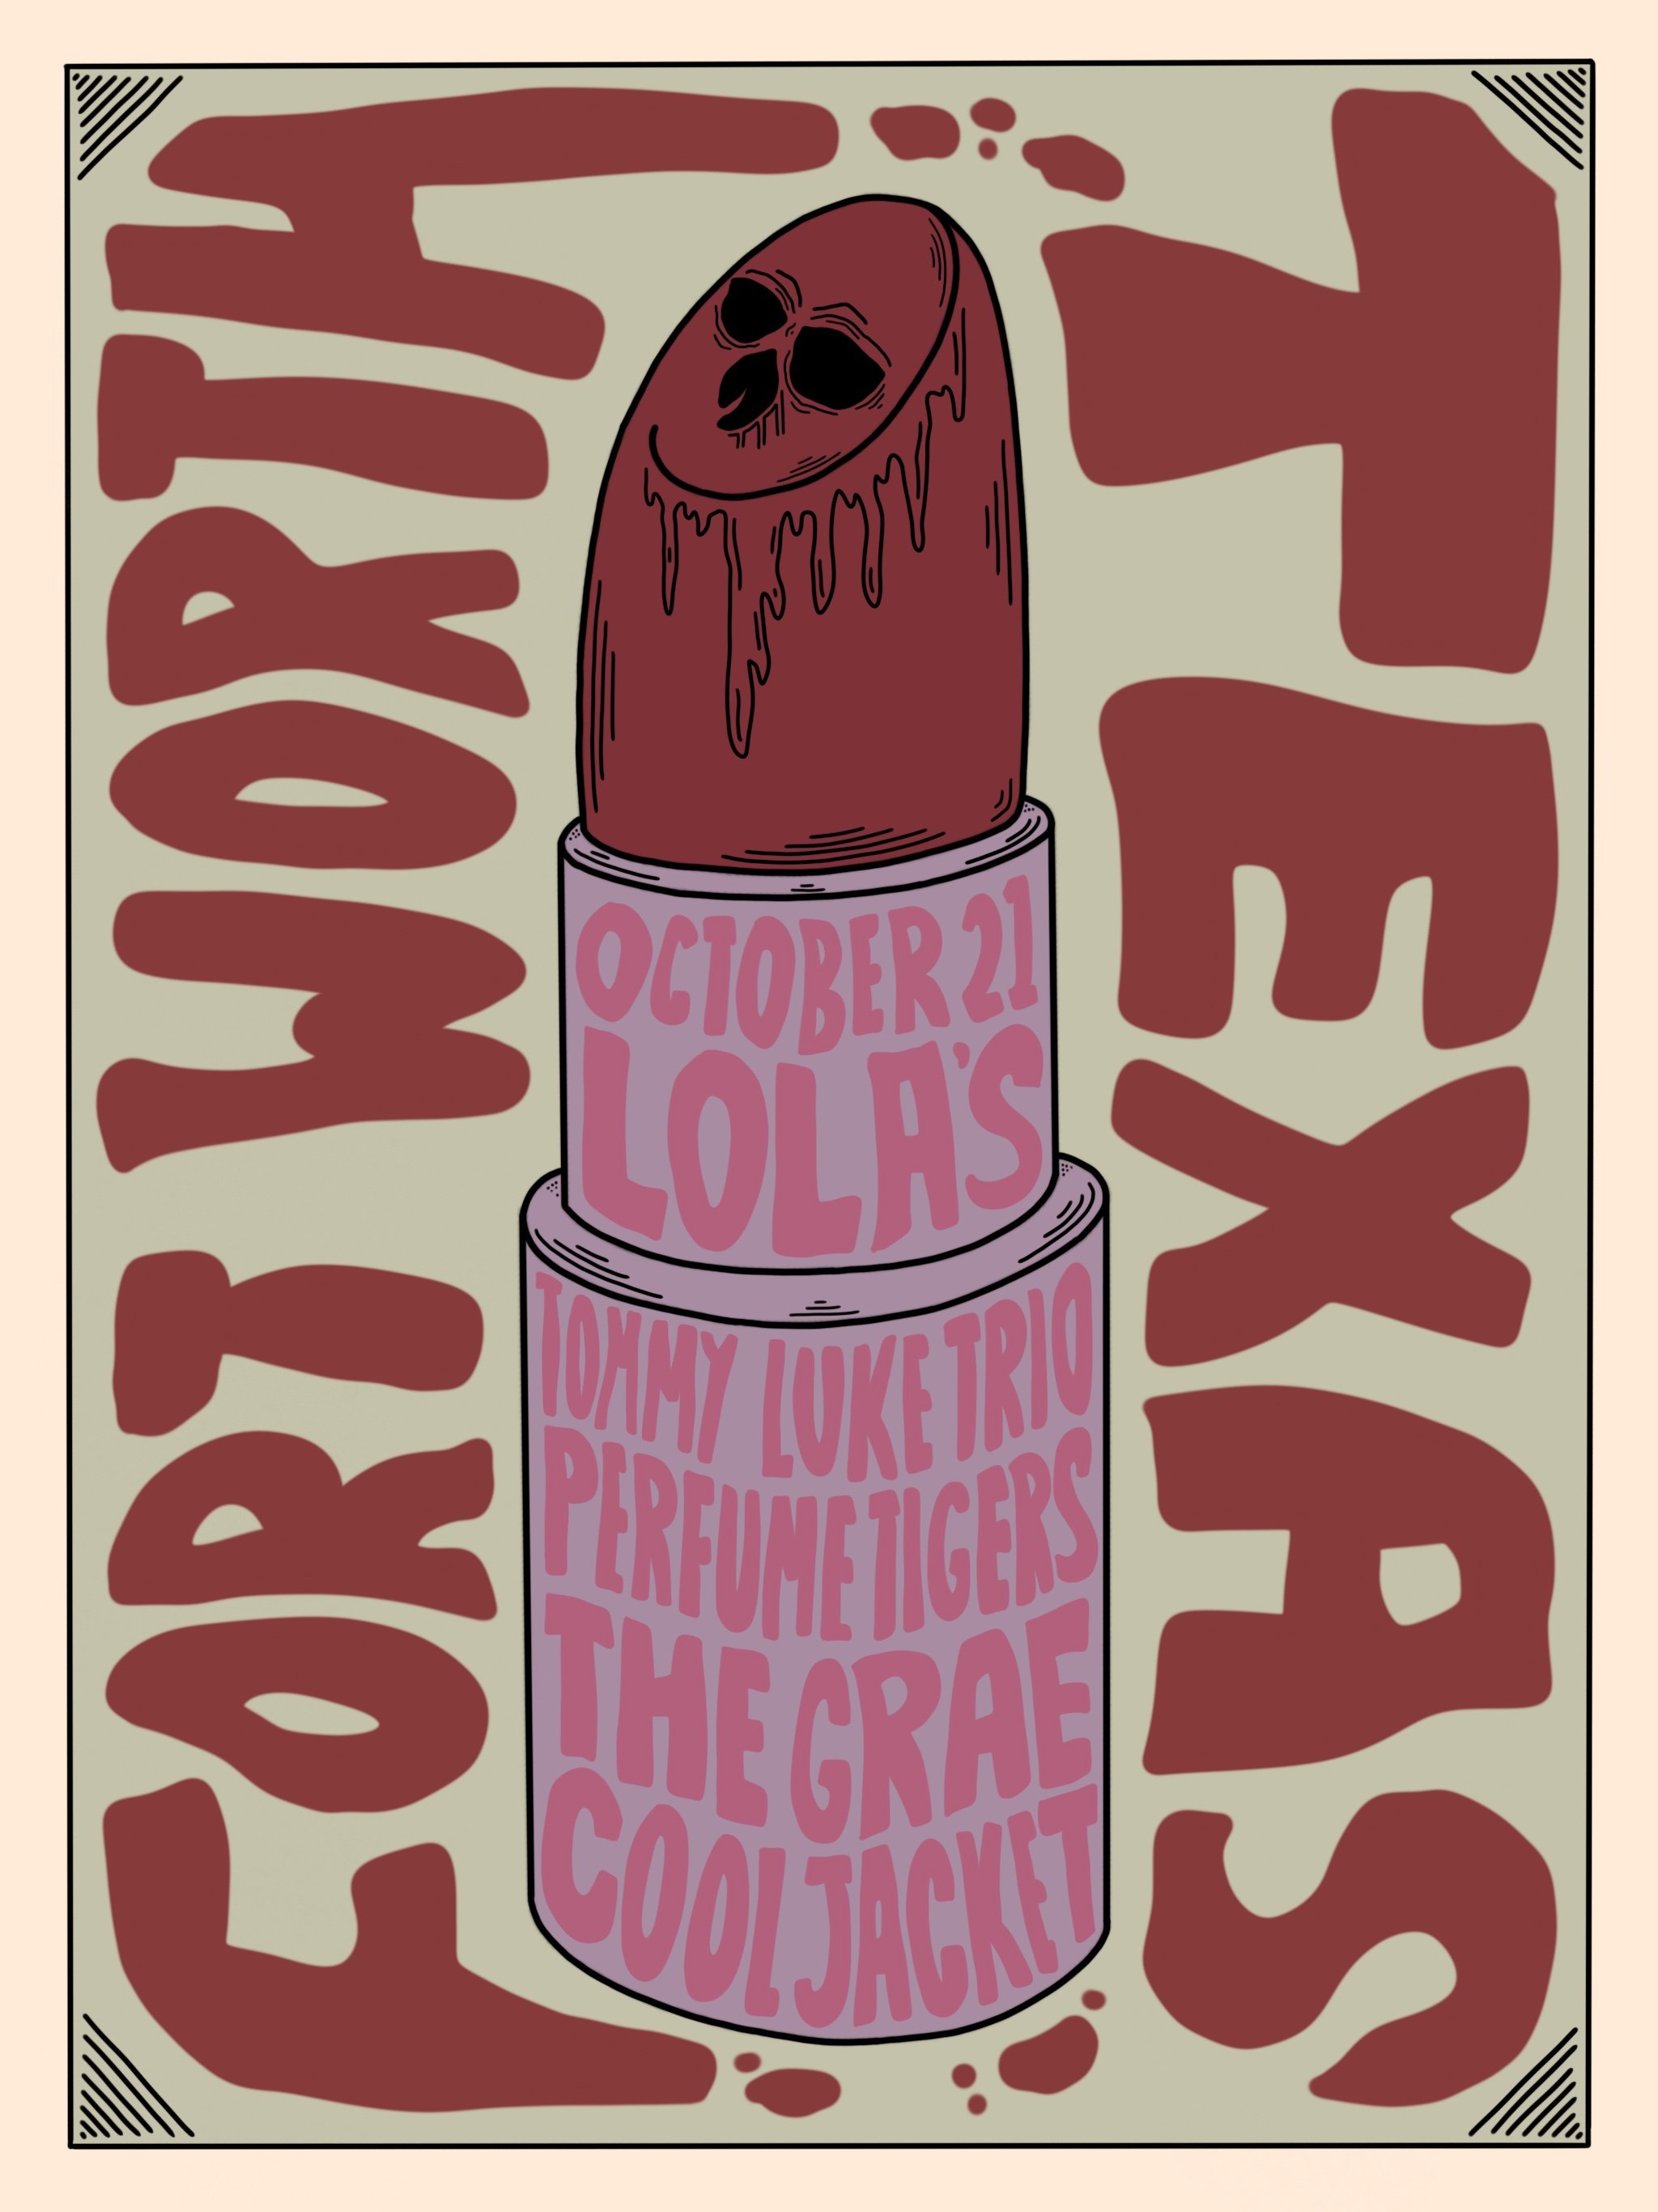 Lola's Show Poster